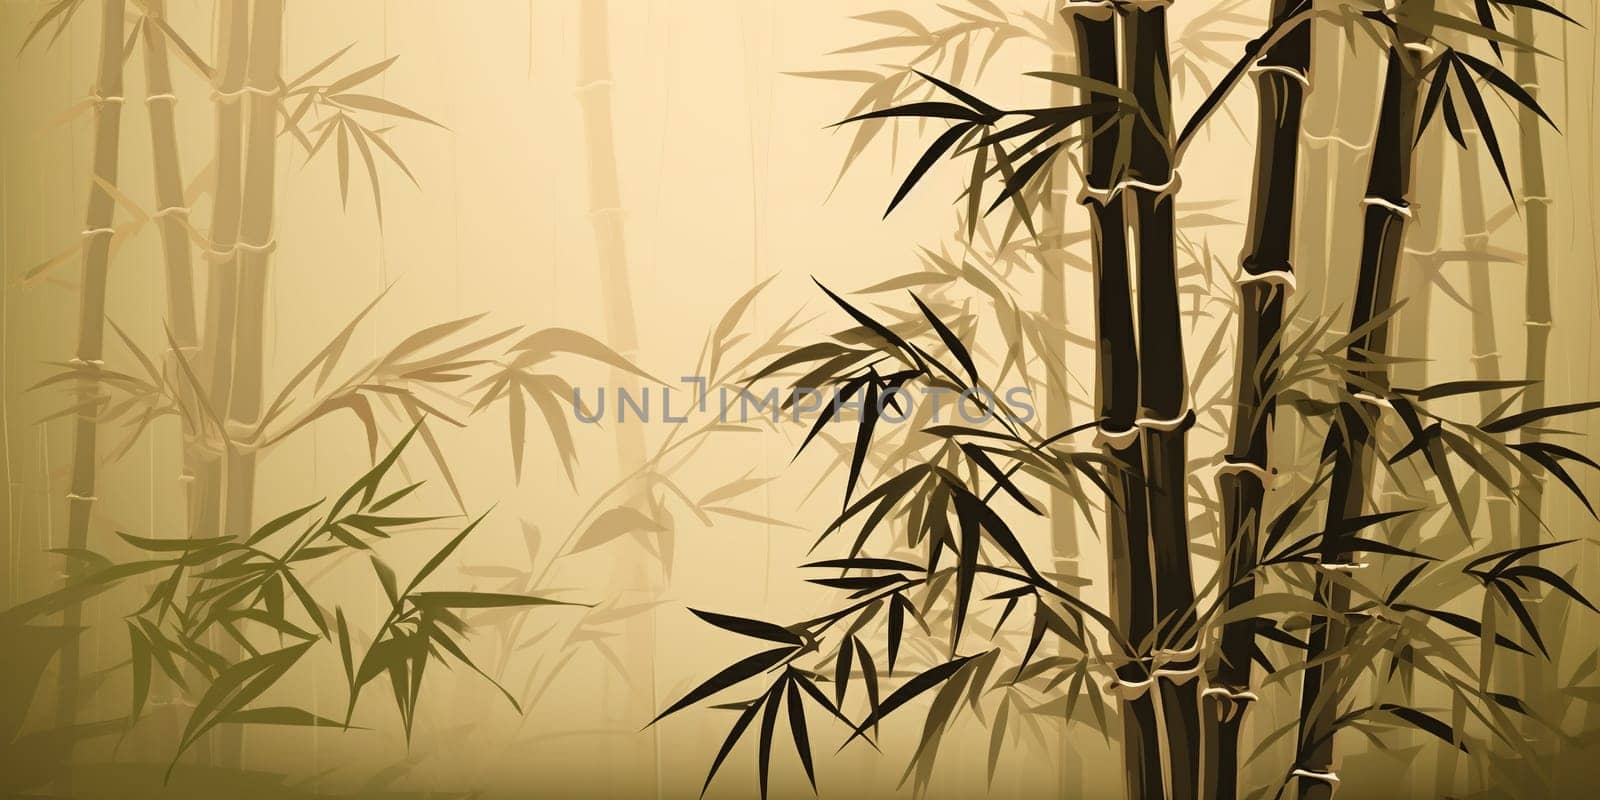 Illustration Of Growing Bamboo Plans As A Nature Background by tan4ikk1